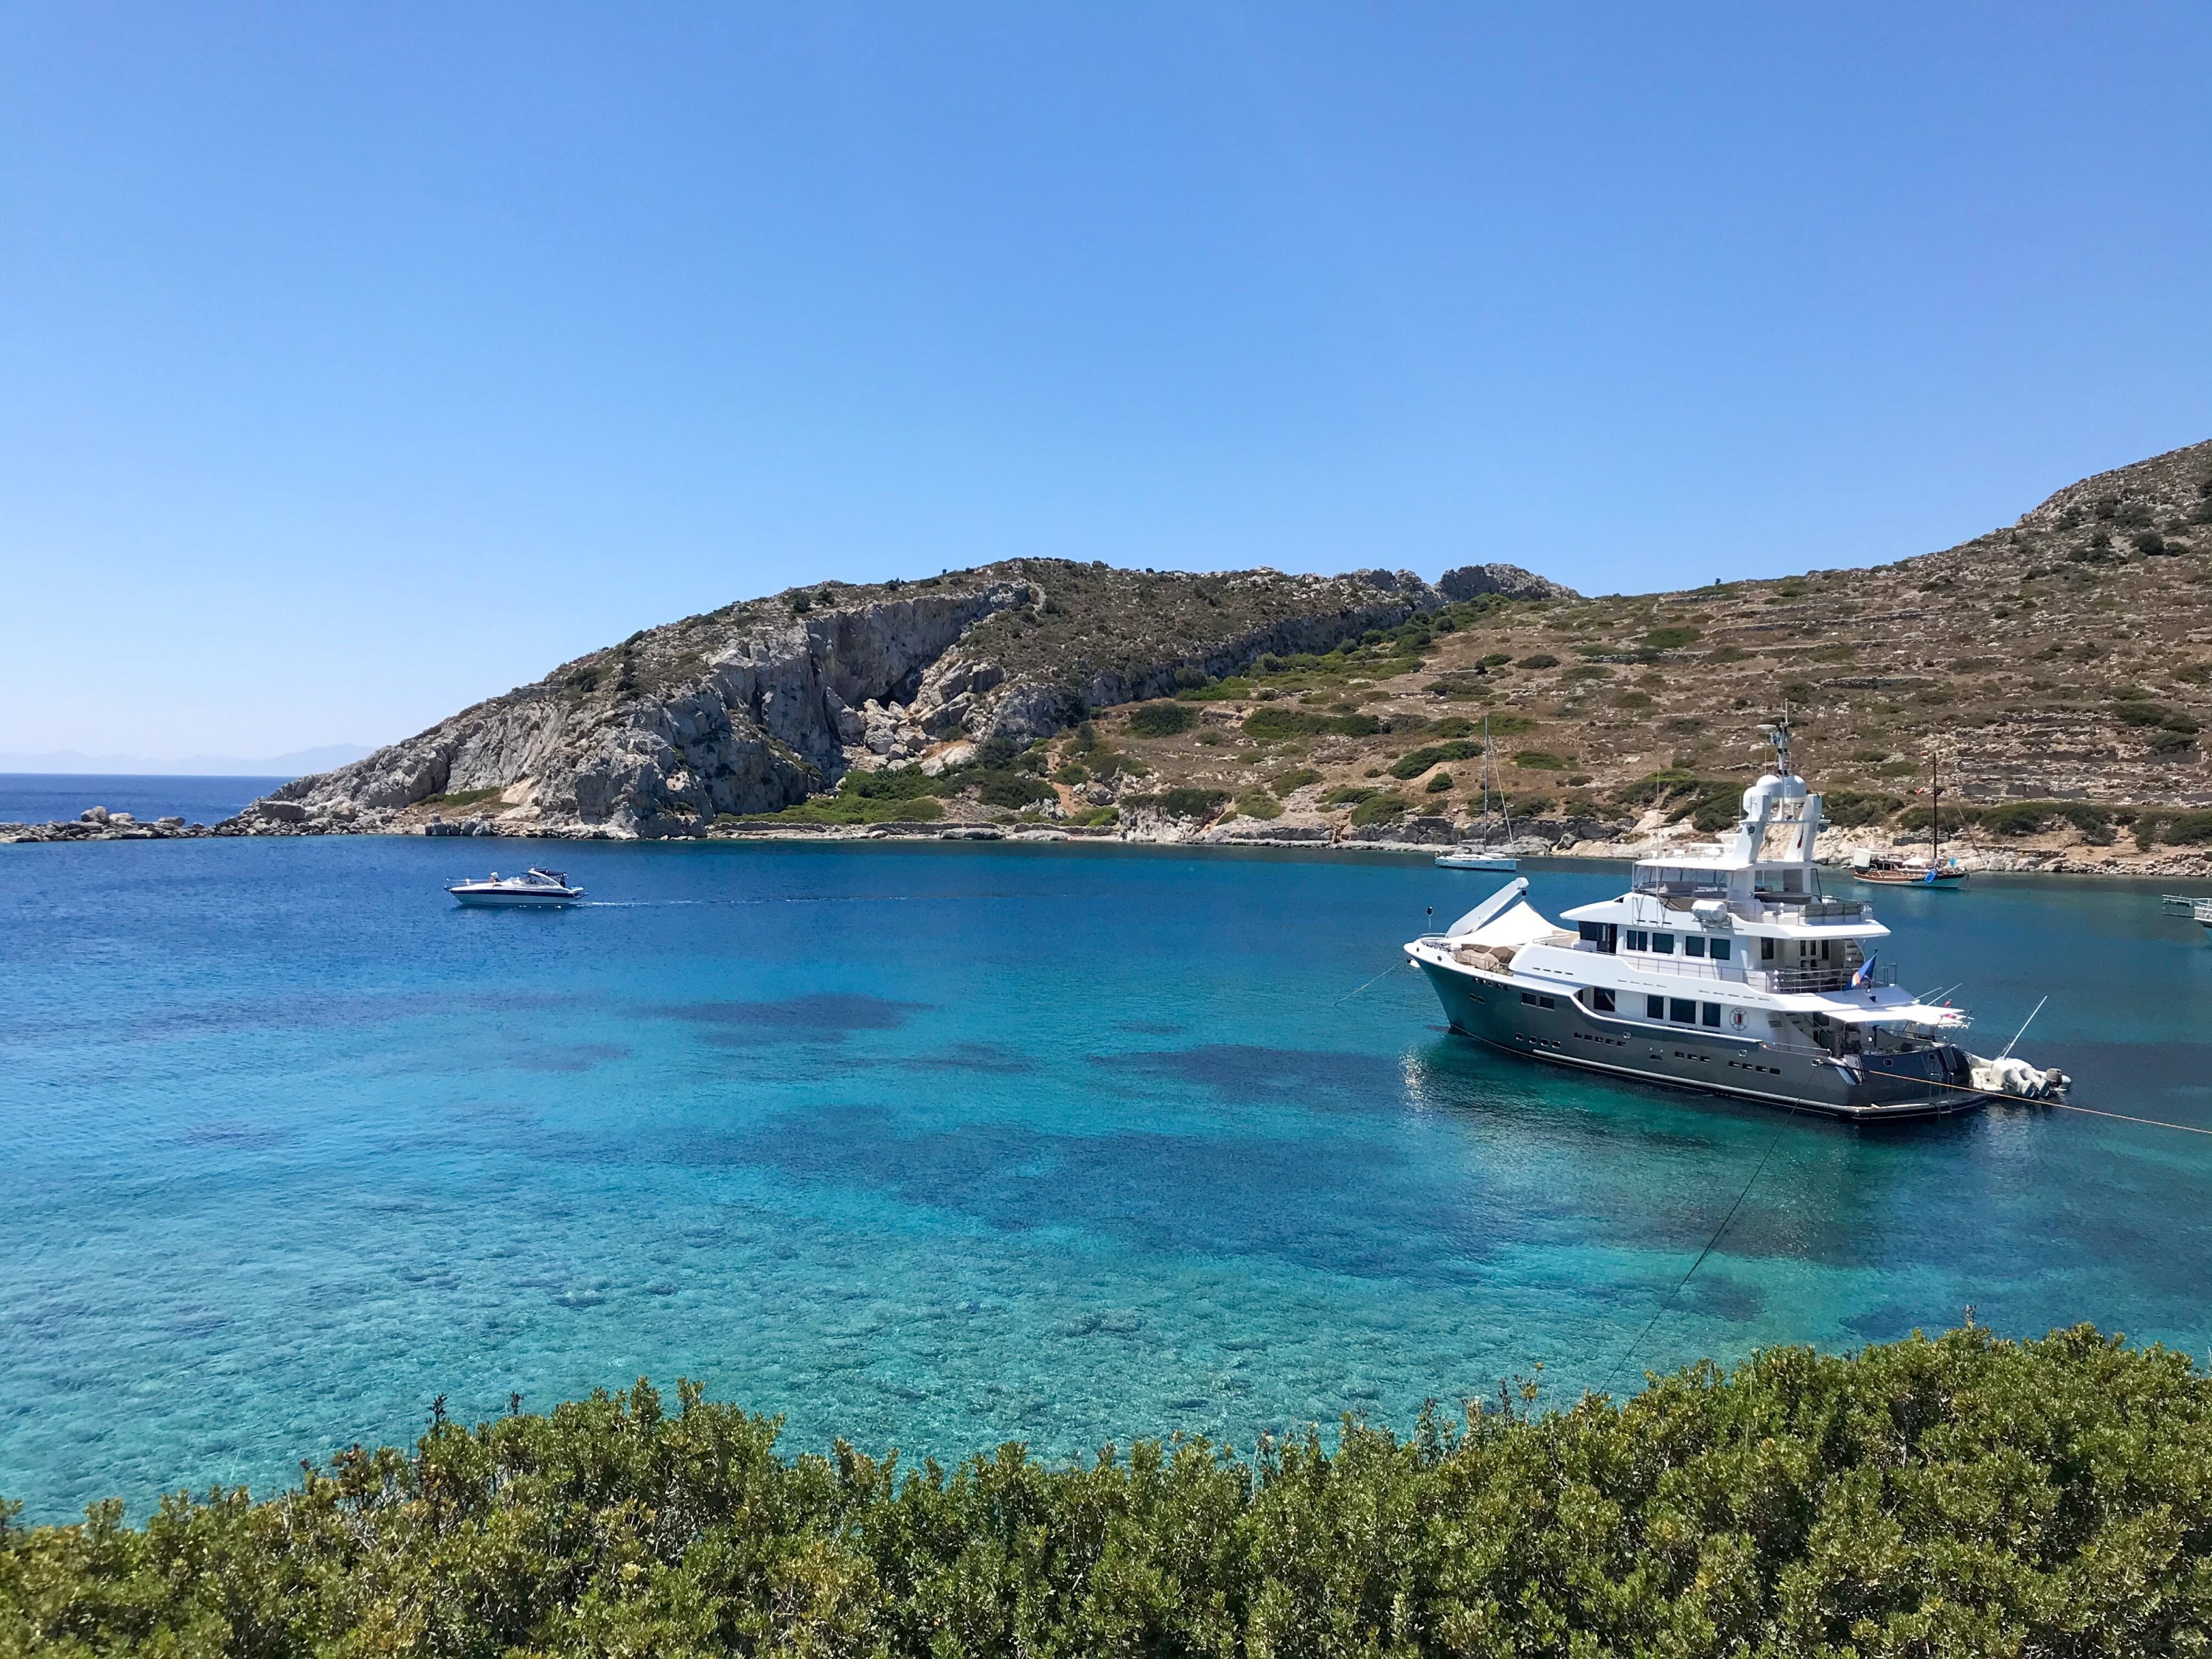 The ancient city of Knidos is a great alternative to finish the day and soak up the sun in Datça. (Photo by Özge Şengelen)